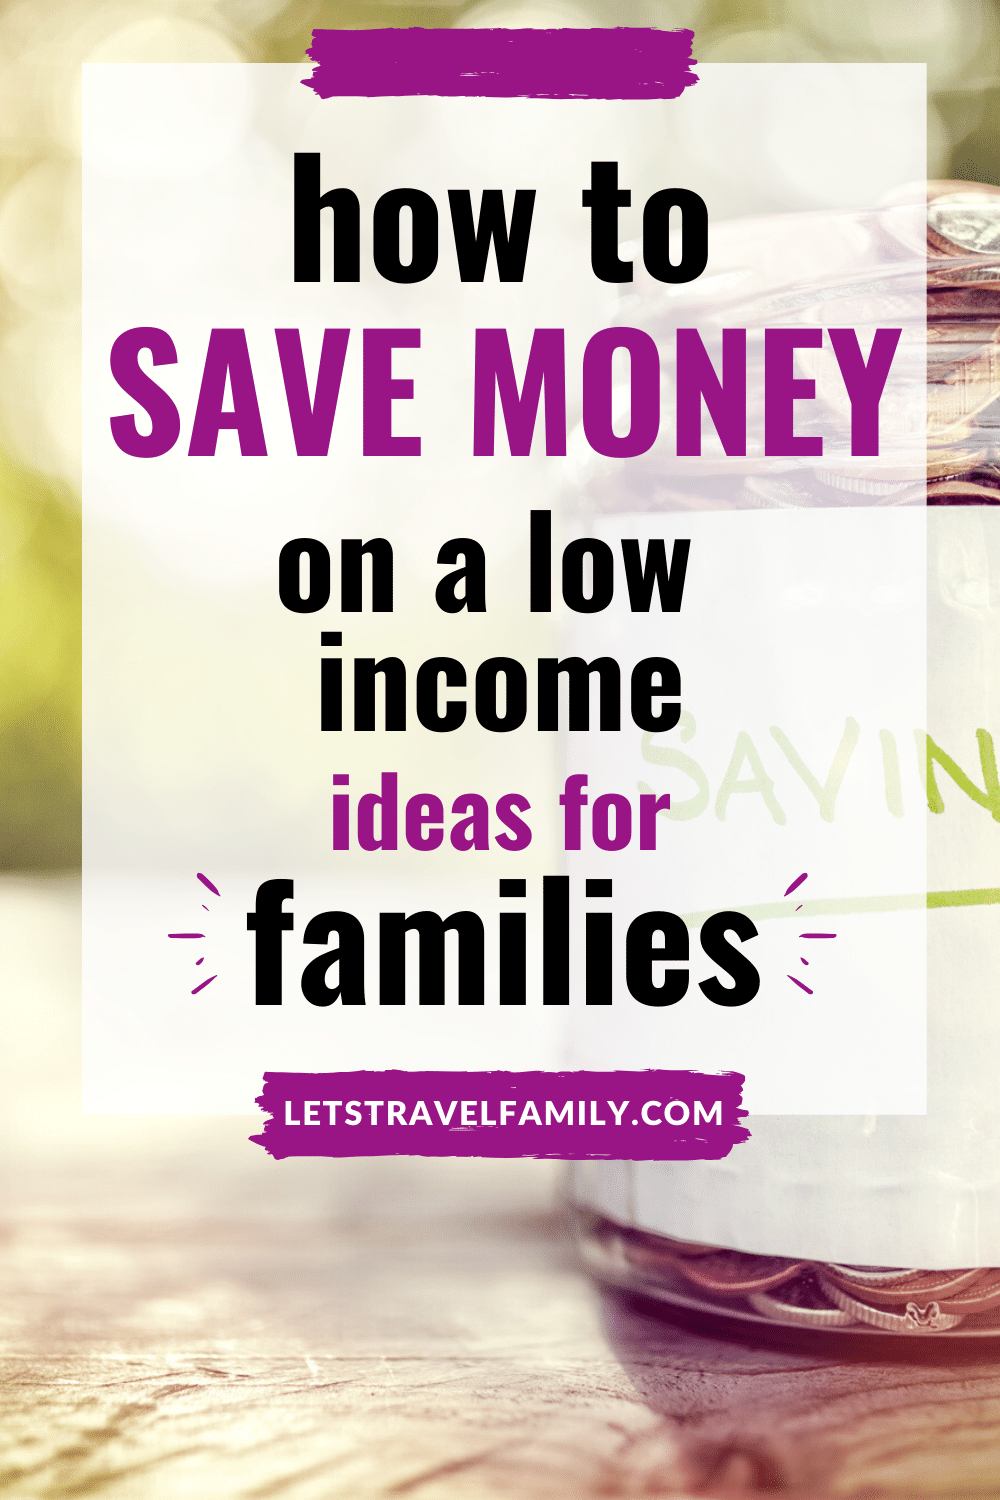 How To Save Money As a Family